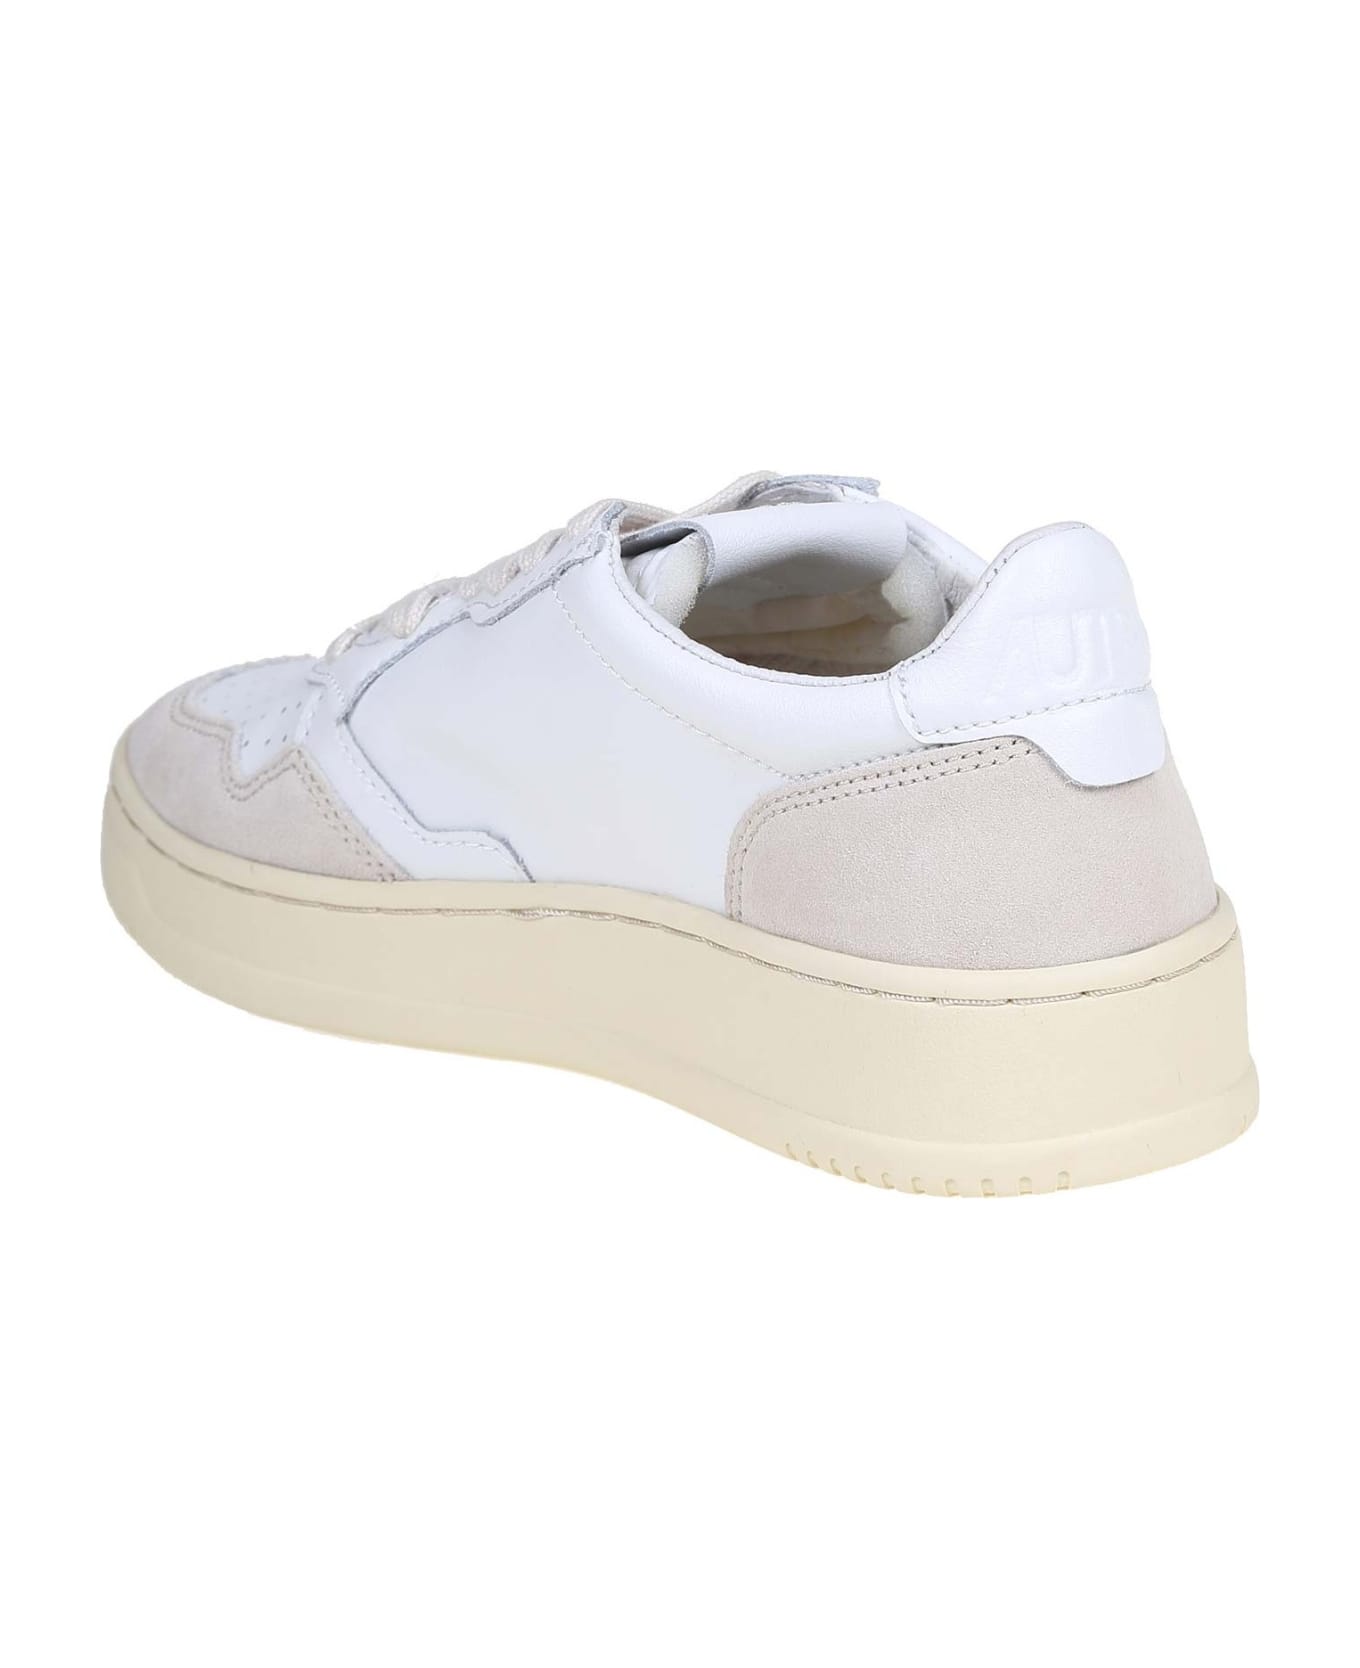 Autry White Leather Sneakers - White